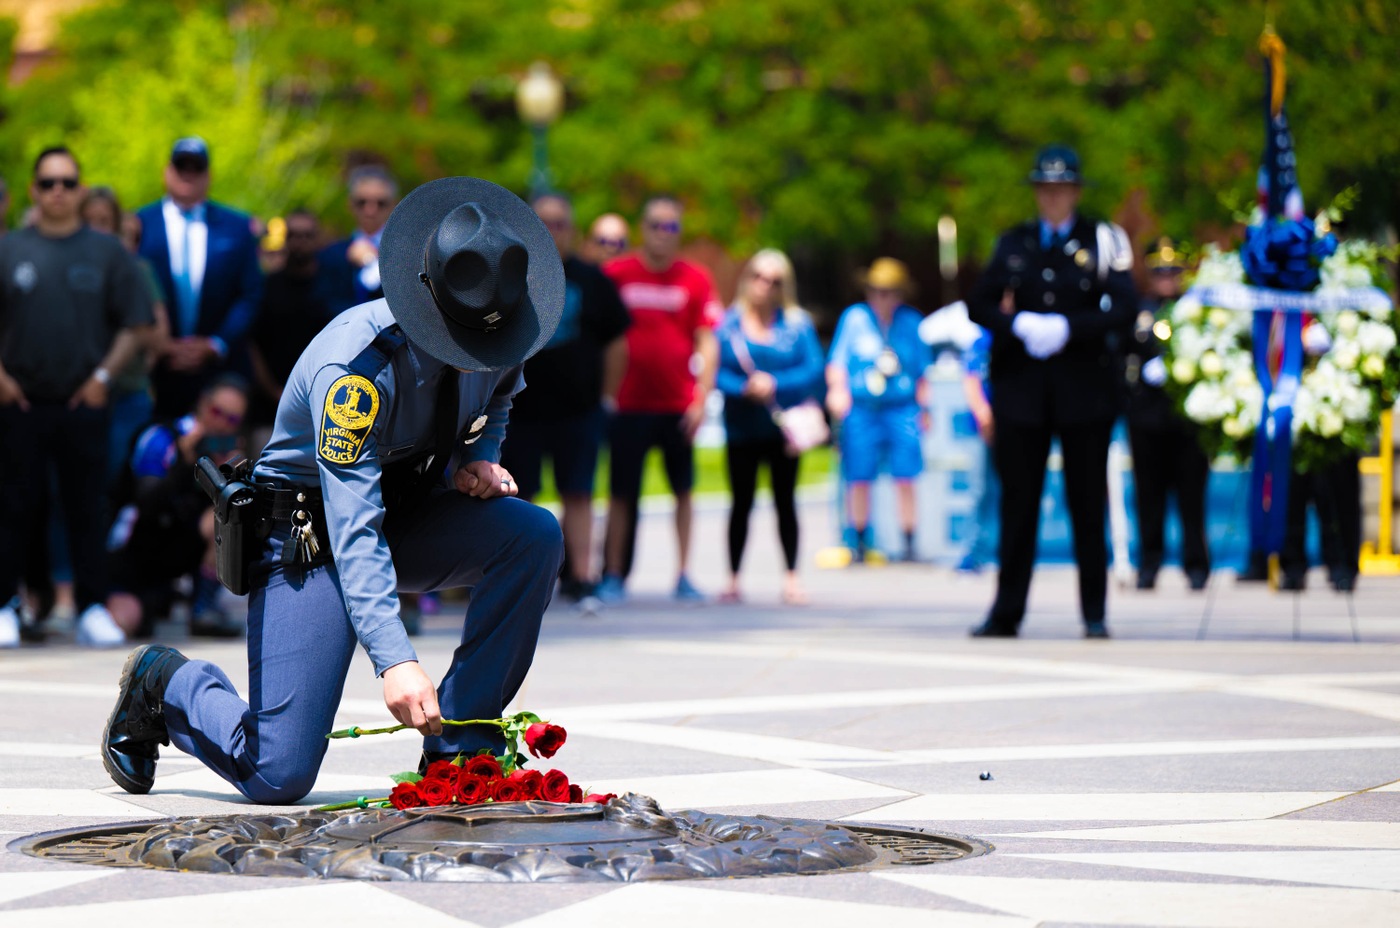 Laying a rose at the National Police K9 Memorial Service on May 13 in Washington, D.C.